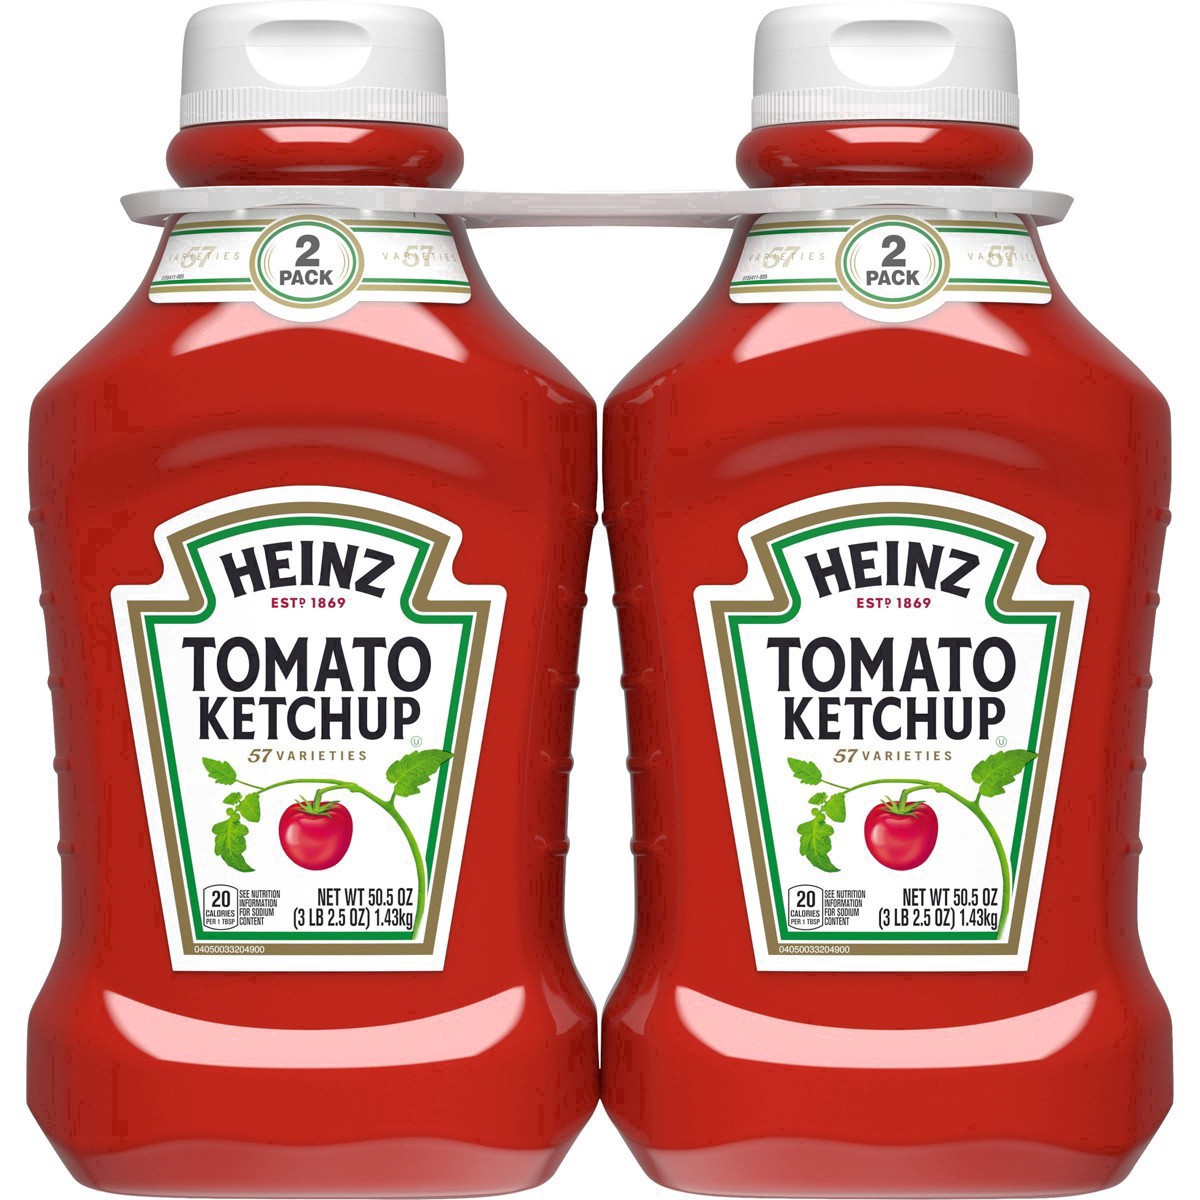 slide 121 of 127, Heinz Tomato Ketchup Pack, 2 ct; 50.5 oz